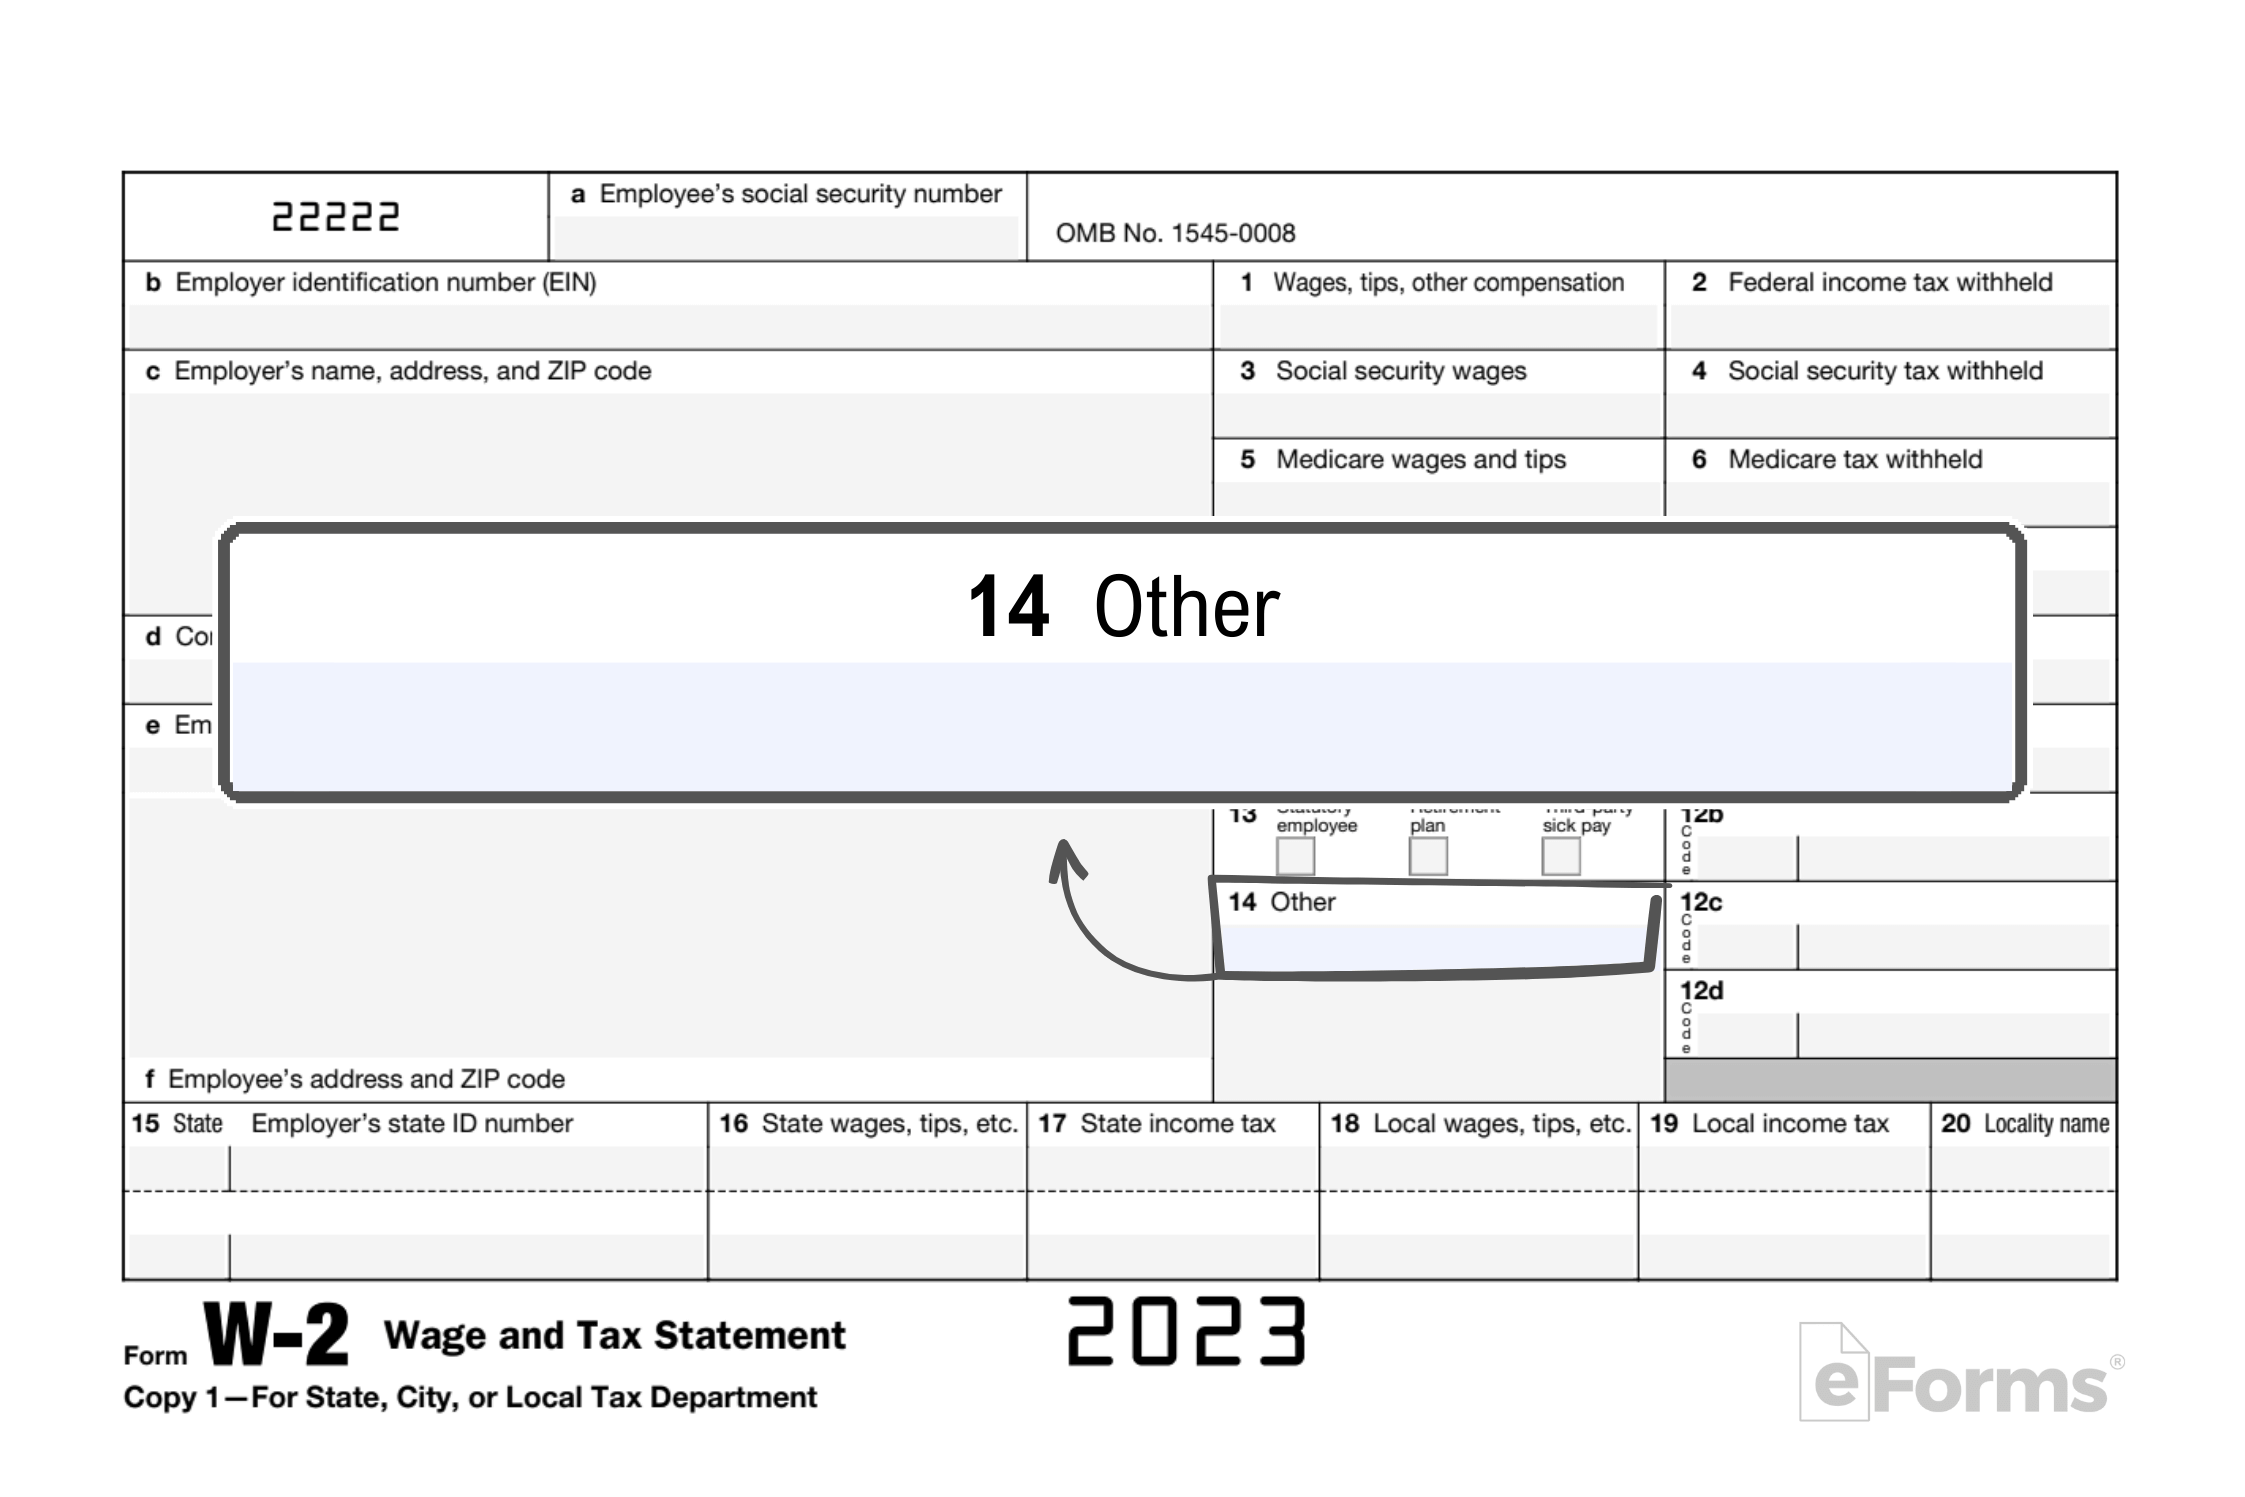 Free Irs Form W-2 | Wage And Tax Statement - Pdf – Eforms within W2 Printable Form